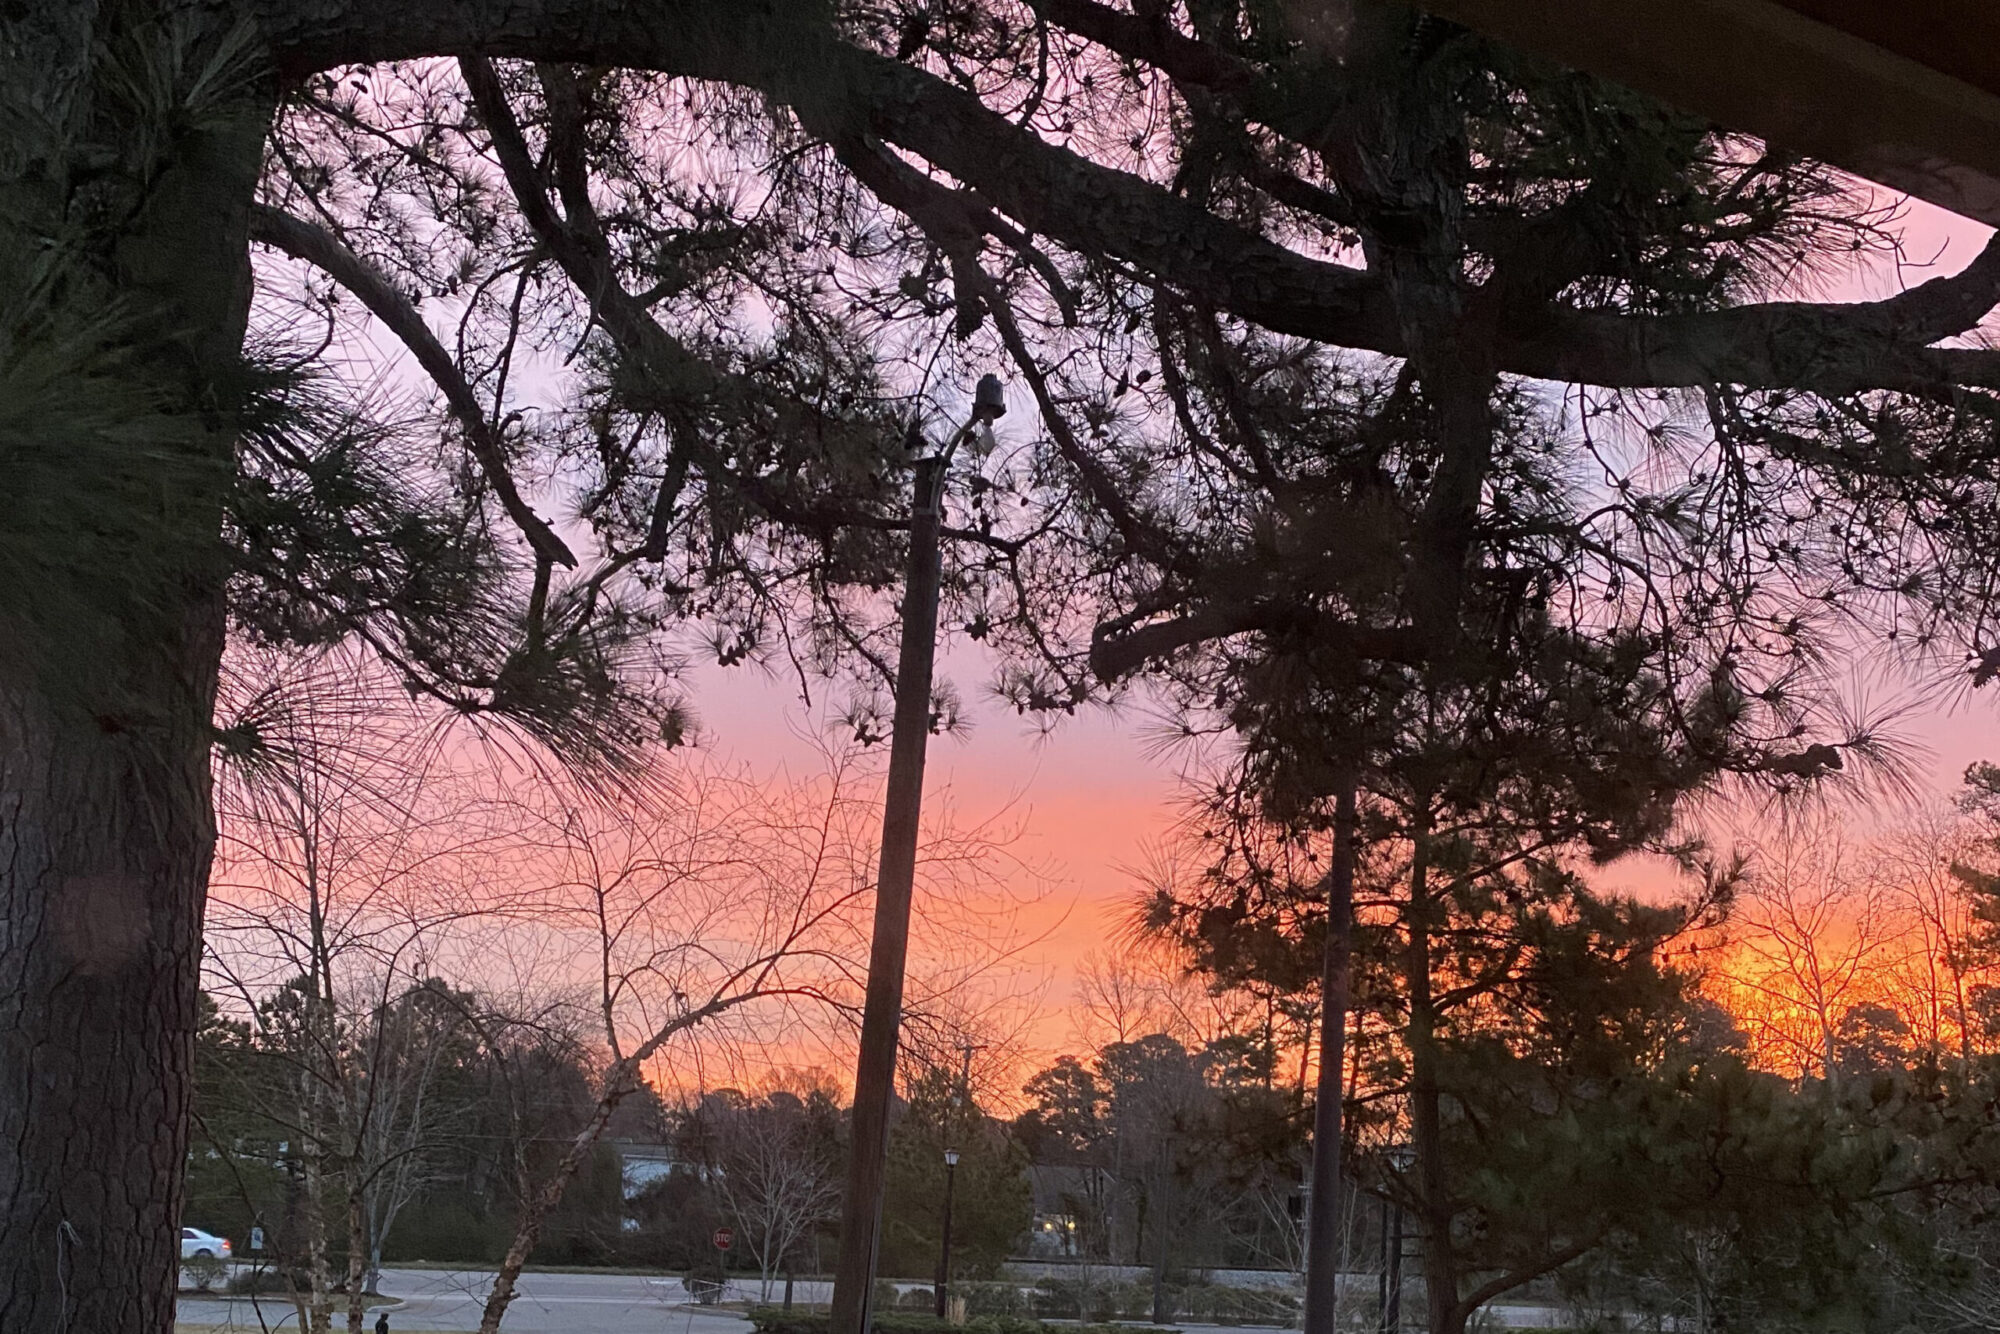 photo of the sun rising, tinting the sky with orange, pink, and purplish tones.